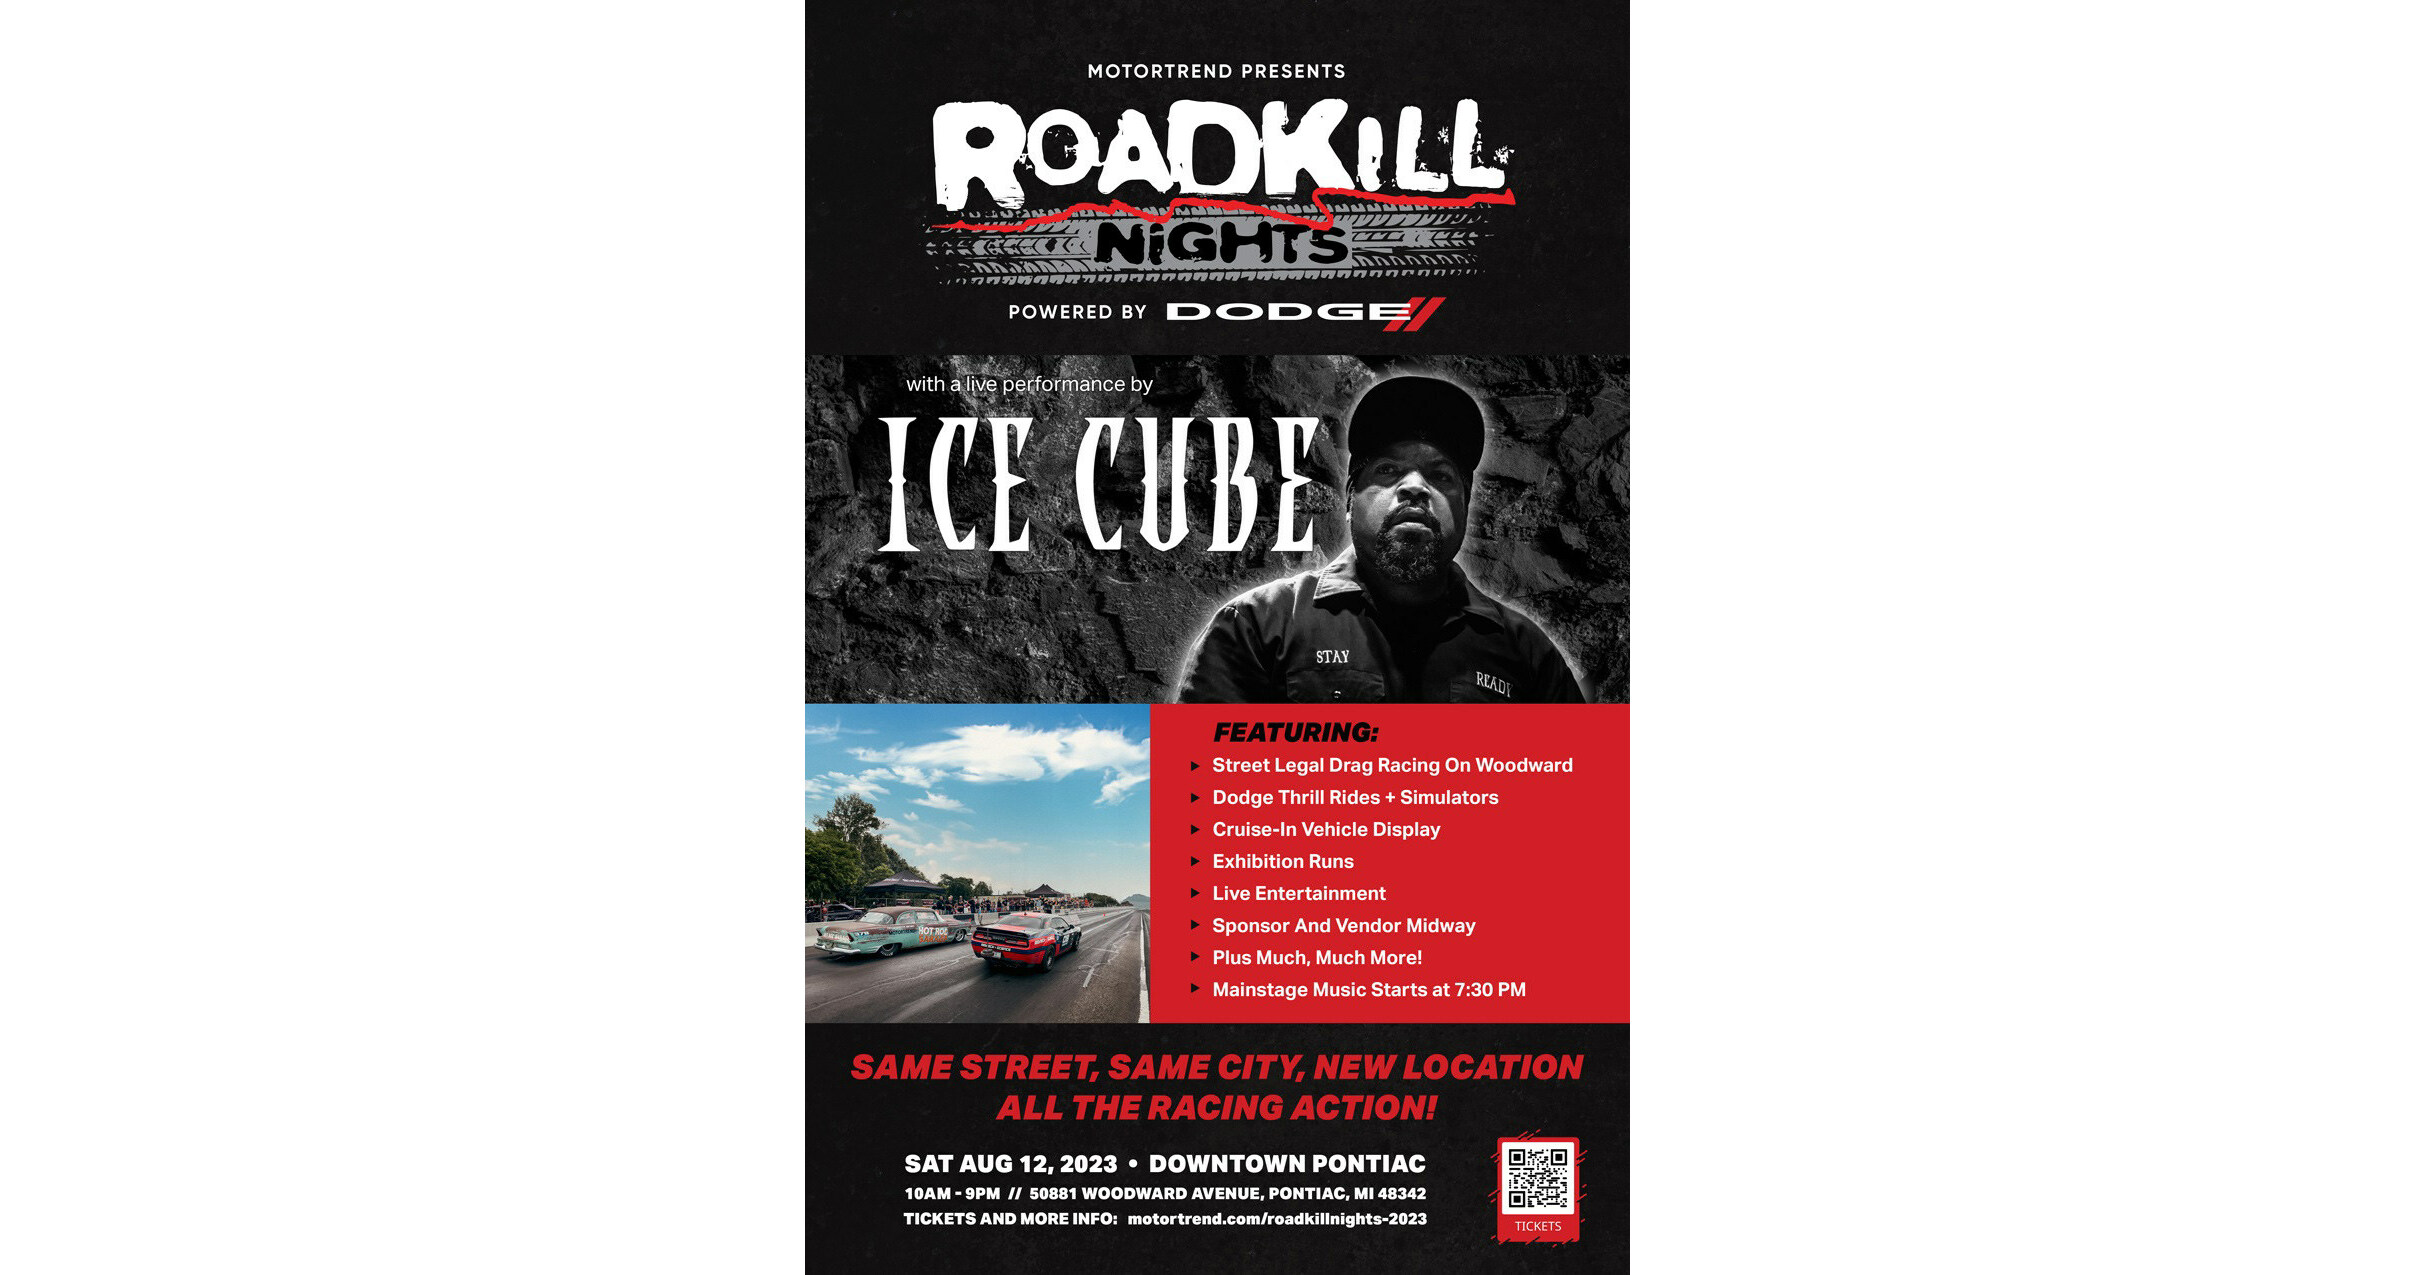 ICE CUBE HEADLINES ‘MOTORTREND PRESENTS ROADKILL NIGHTS POWERED BY DODGE’ ON AUGUST 12